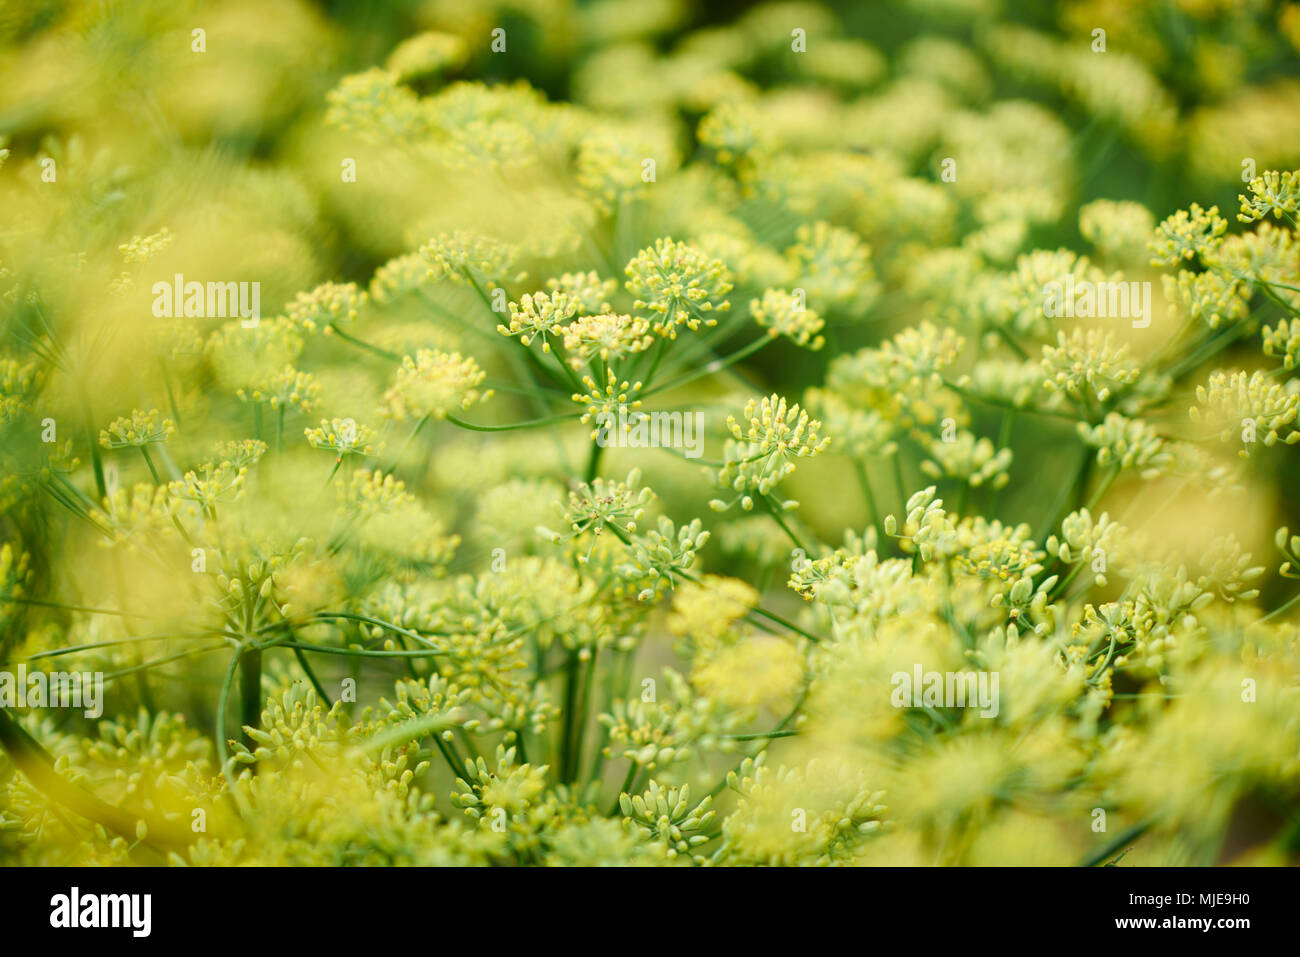 Dill as a crop plant with many flowers and umbels in yellow and green Stock Photo